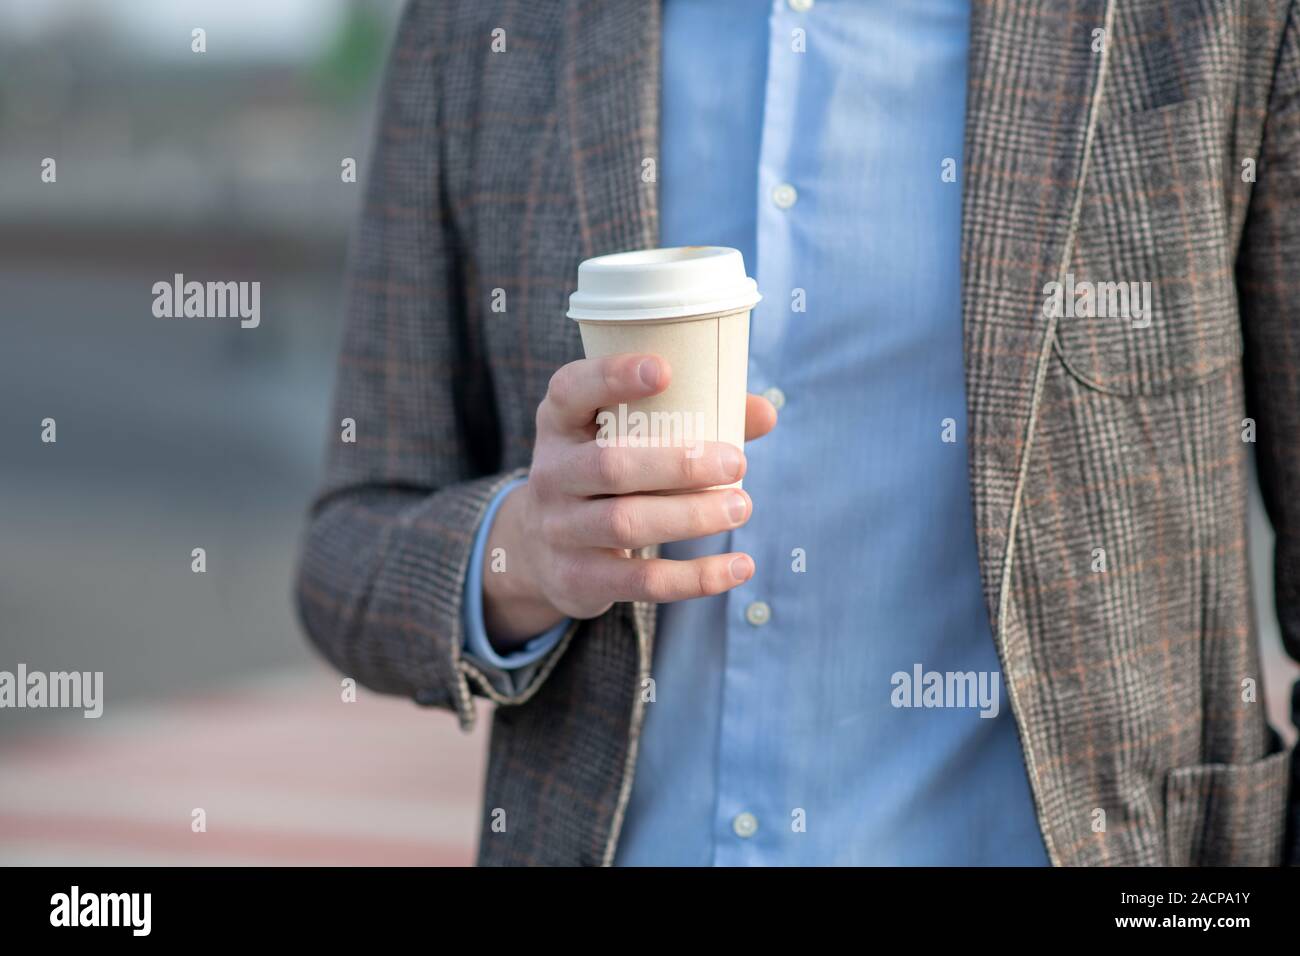 Man in a blue shirt holding a cup of coffee Stock Photo